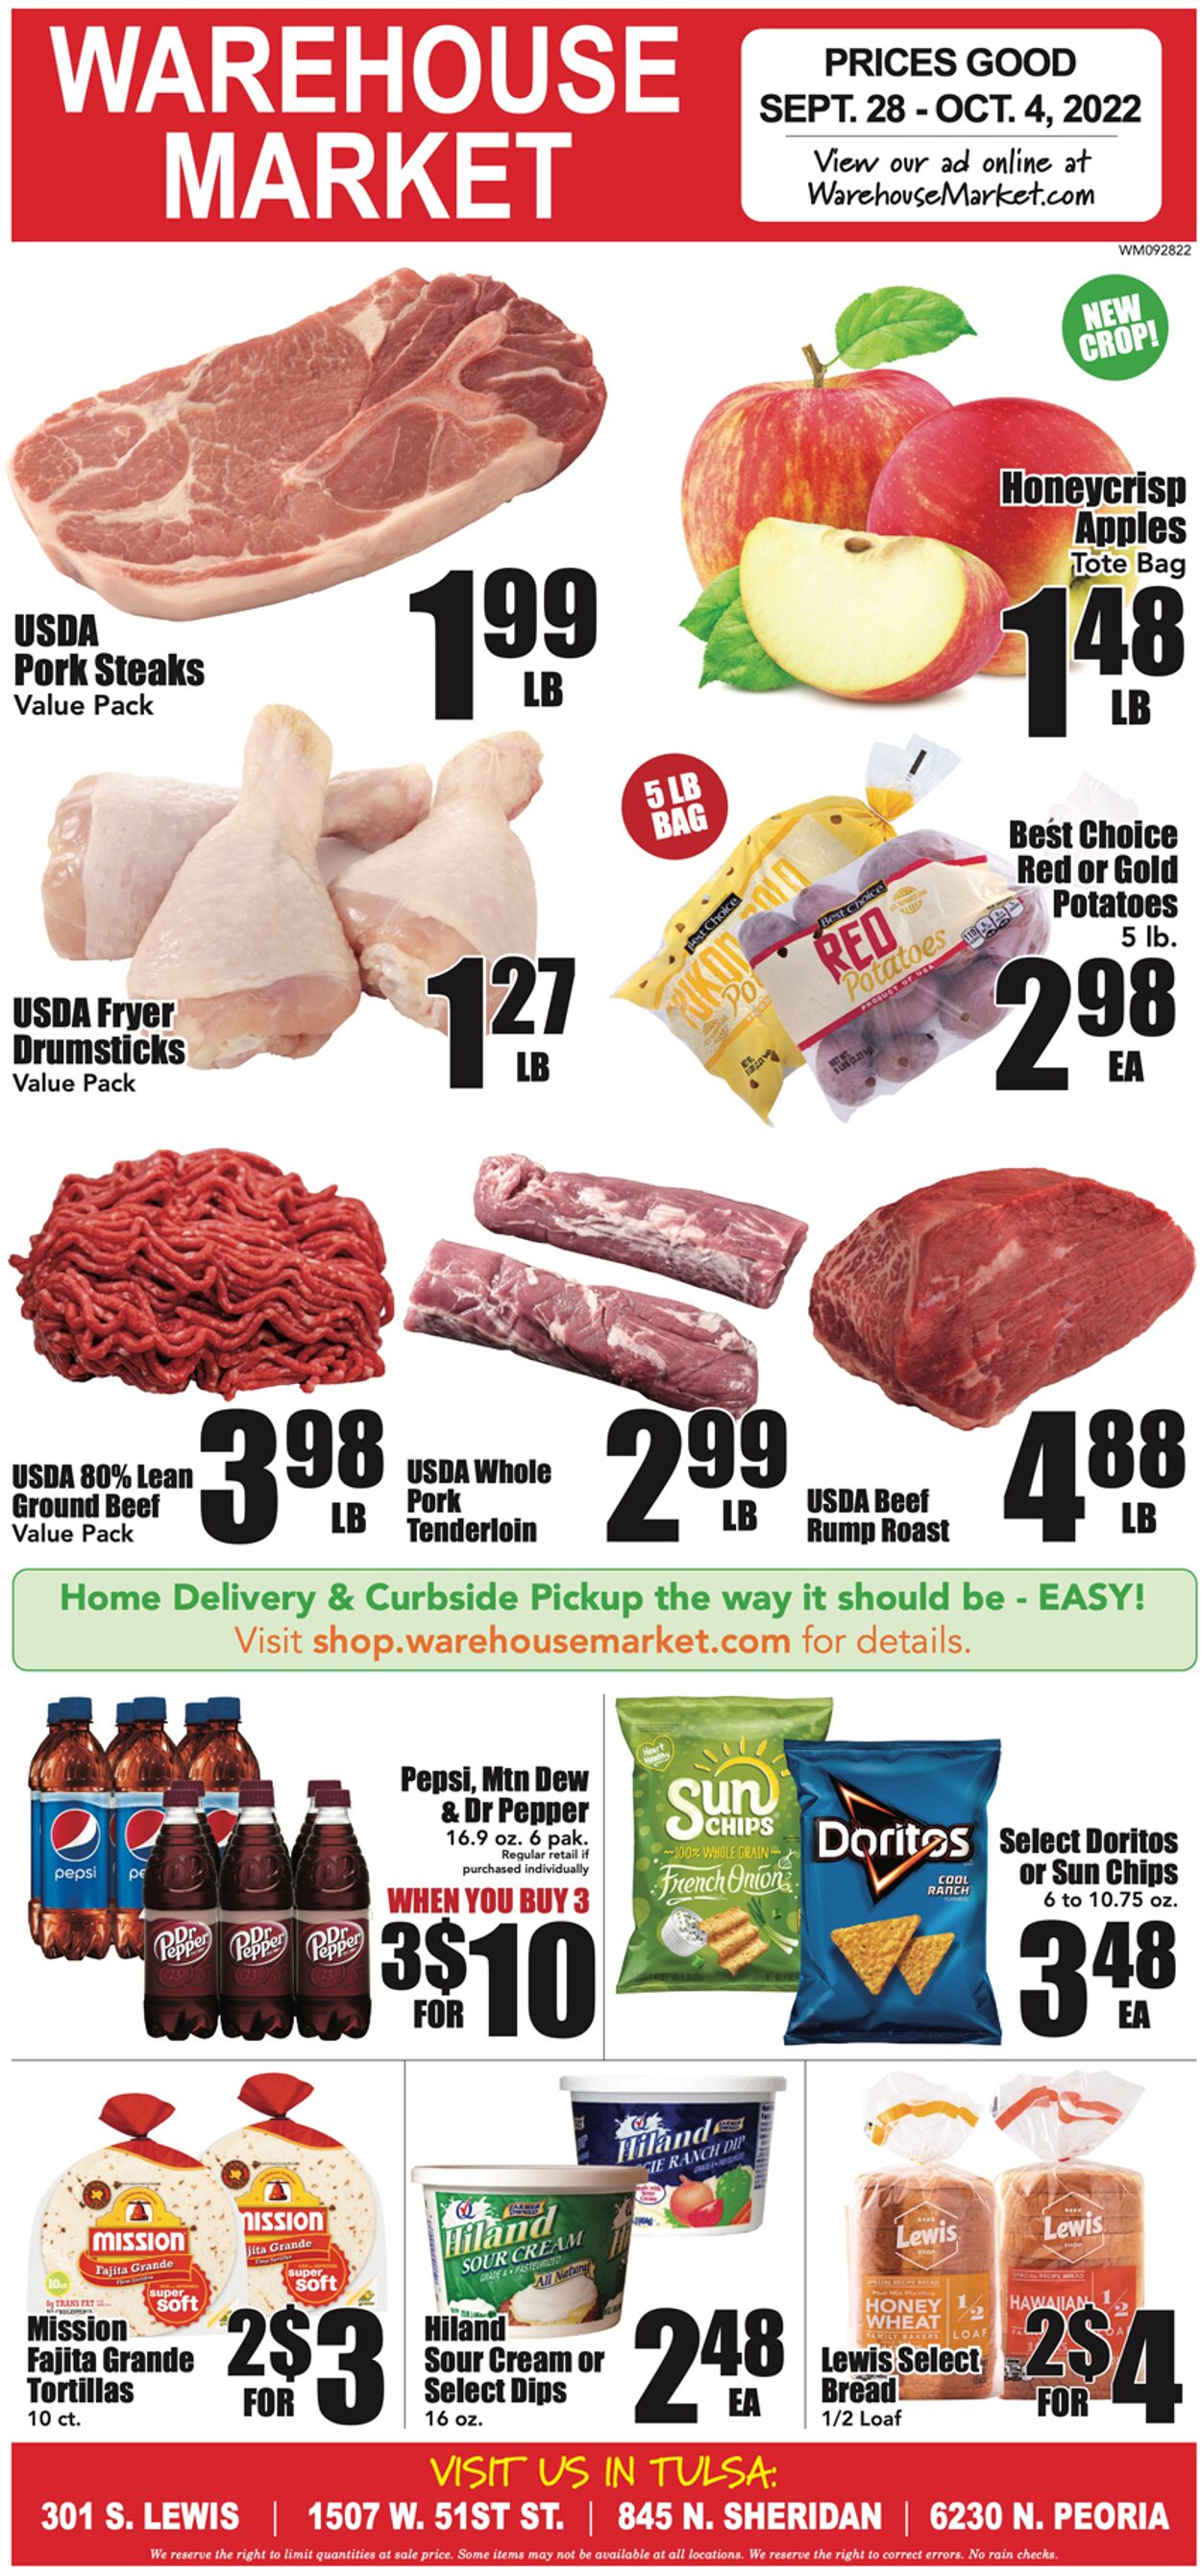 Warehouse Market Promotional weekly ads